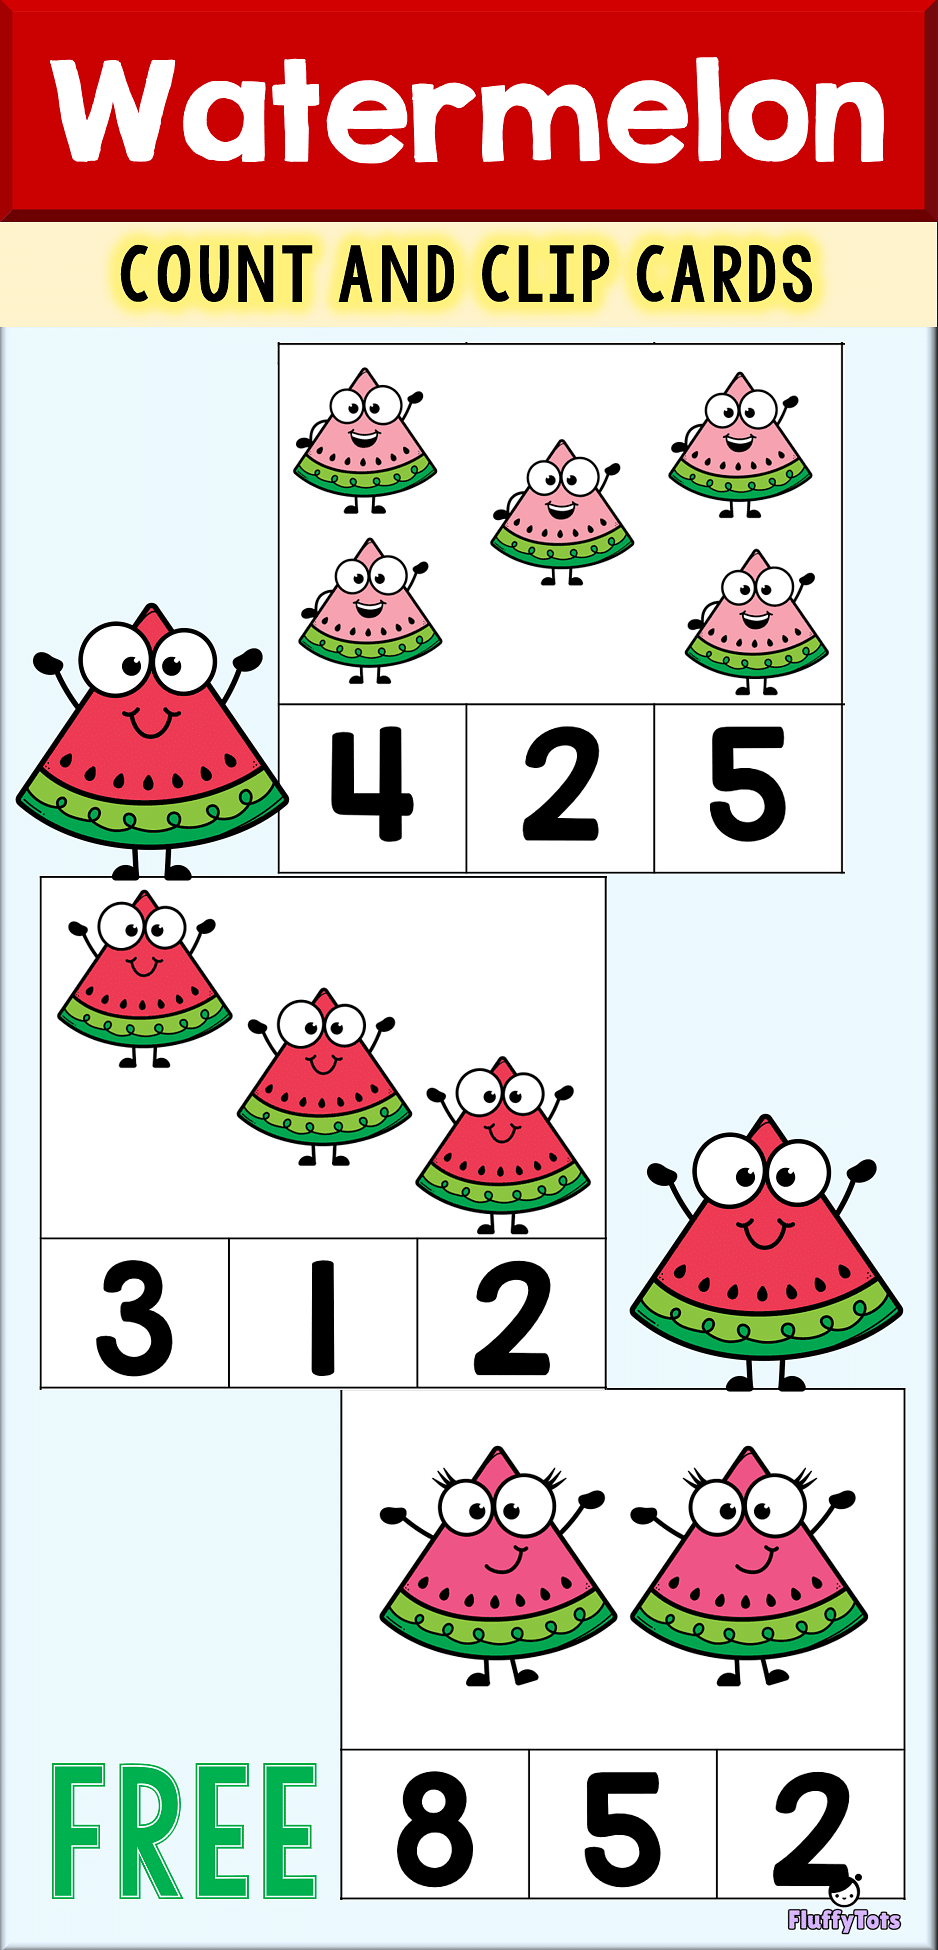 watermelon count and clip cards